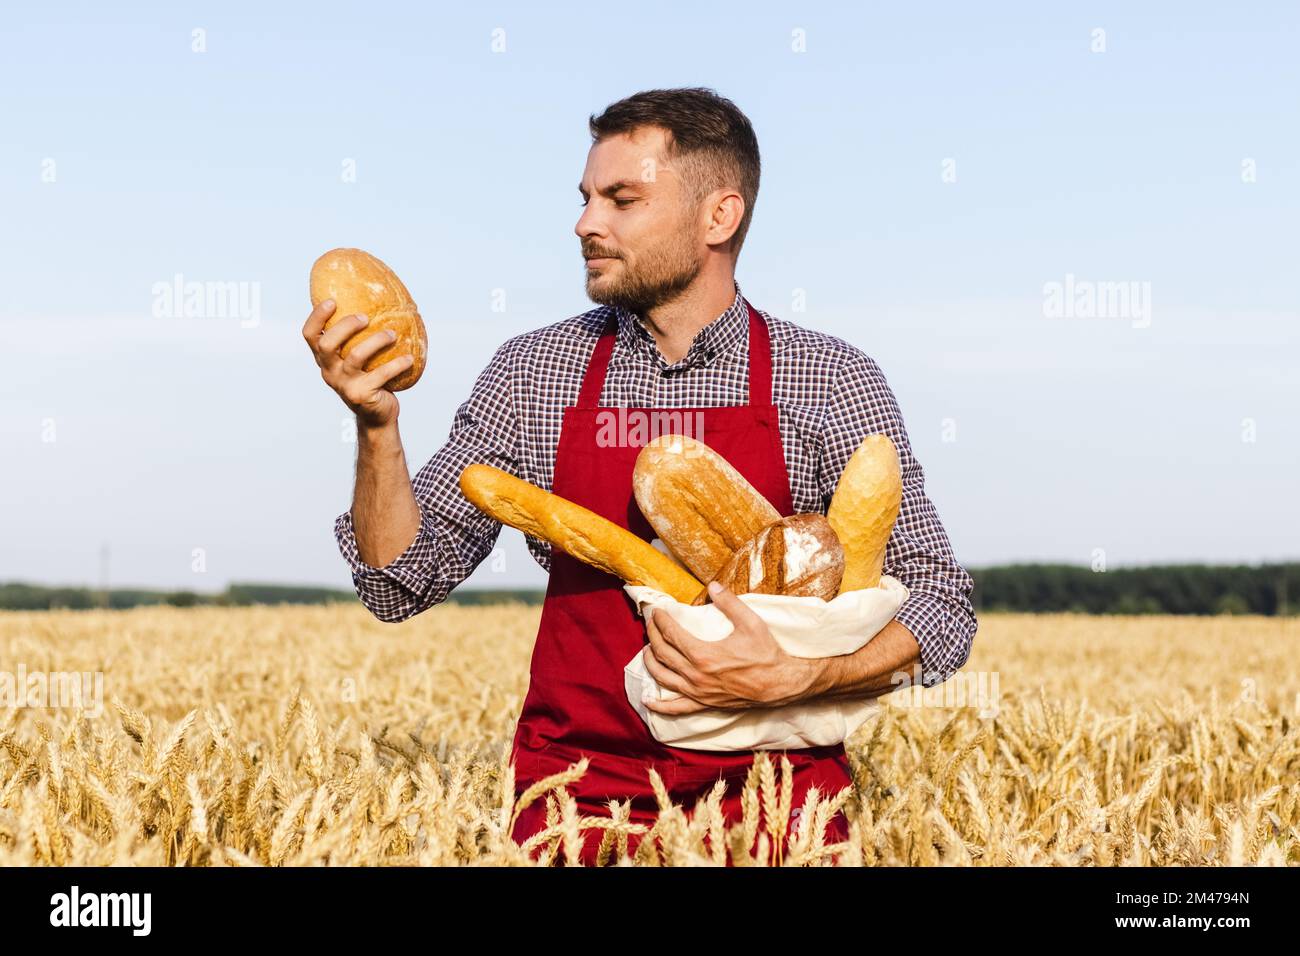 Baker stands in a wheat field and holds loaves of bread in his hands. Farmer looking at loaf of bread. Stock Photo